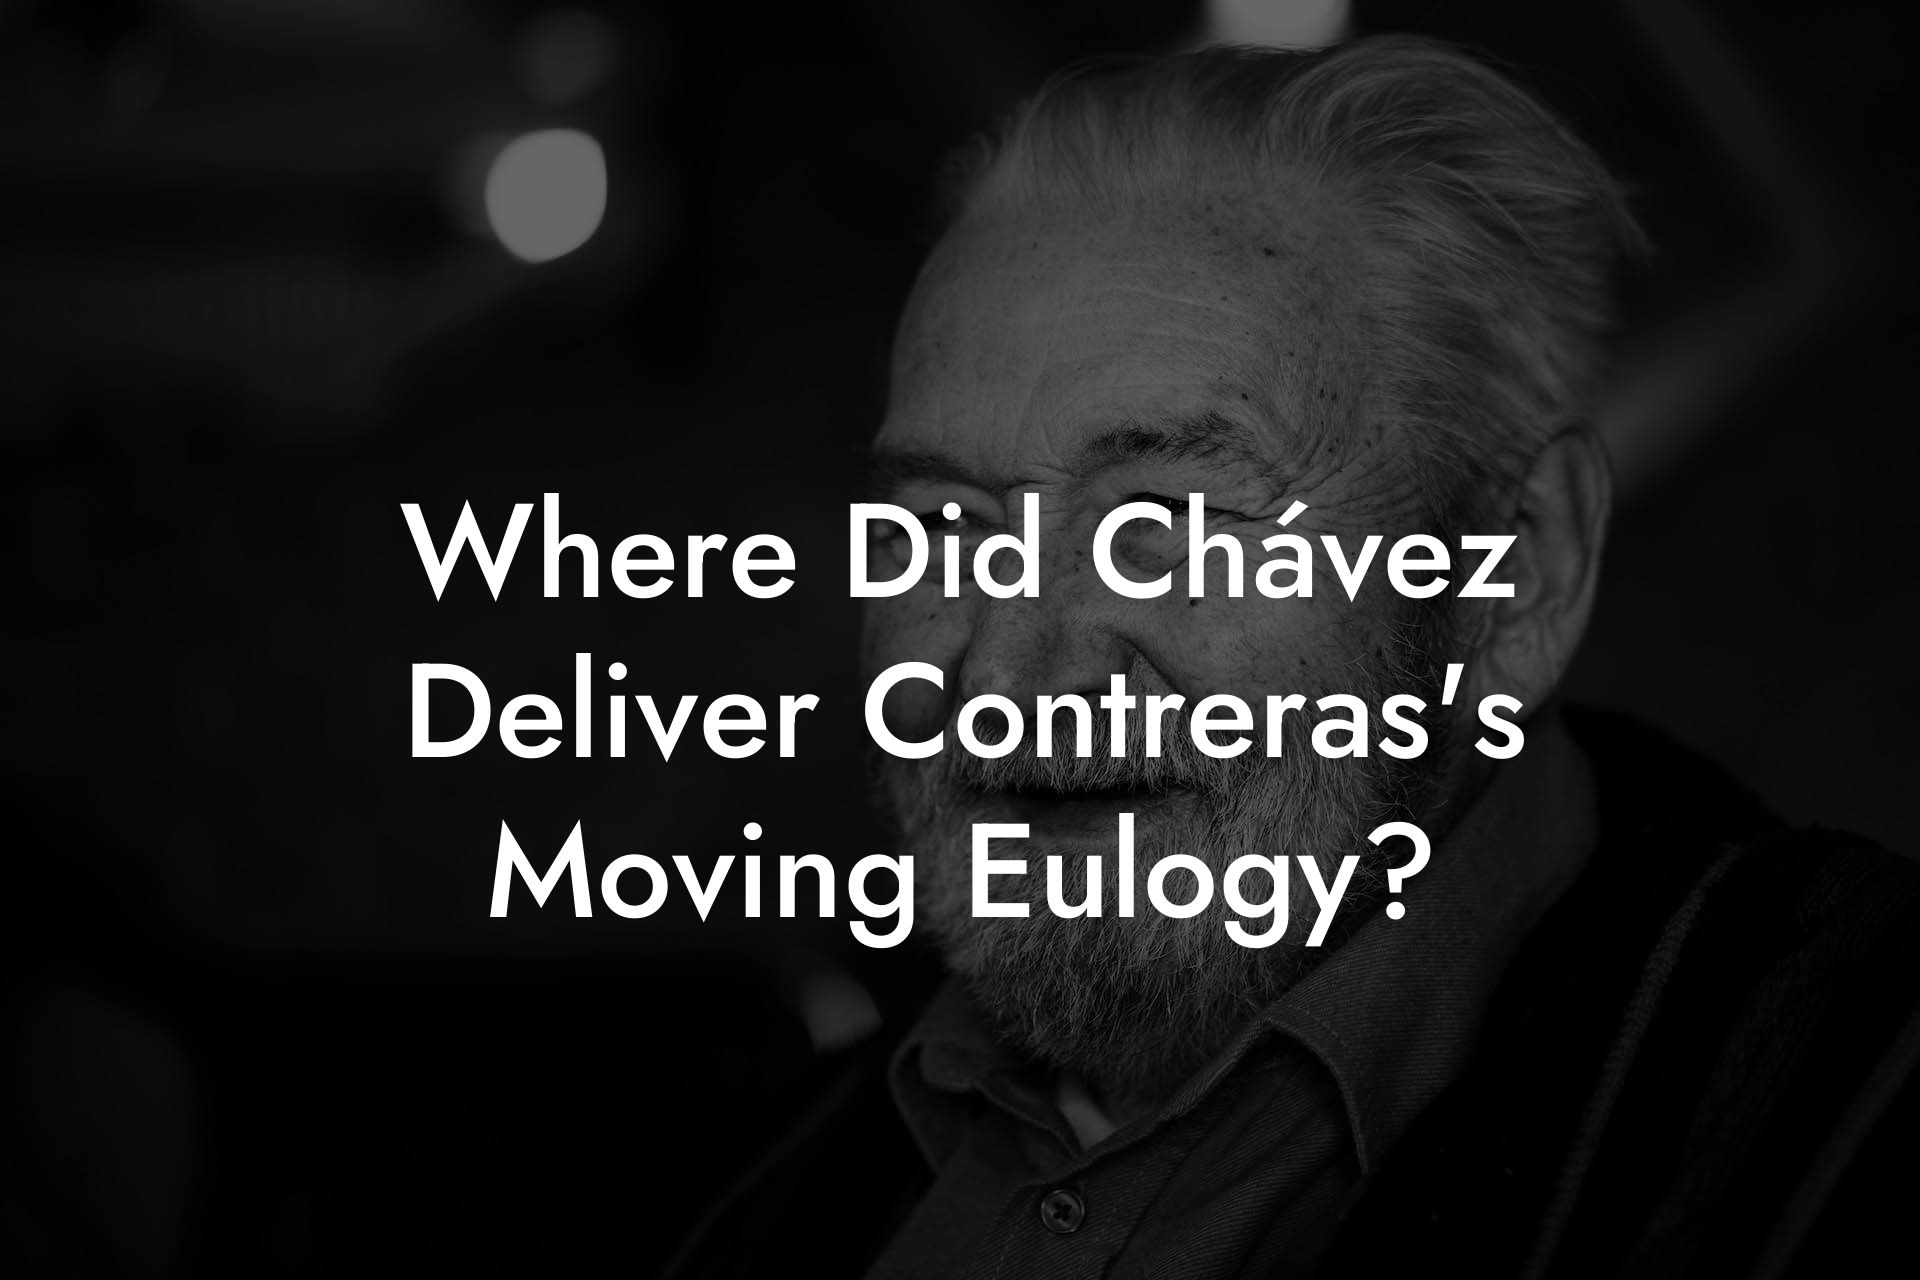 Where Did Chávez Deliver Contreras's Moving Eulogy?